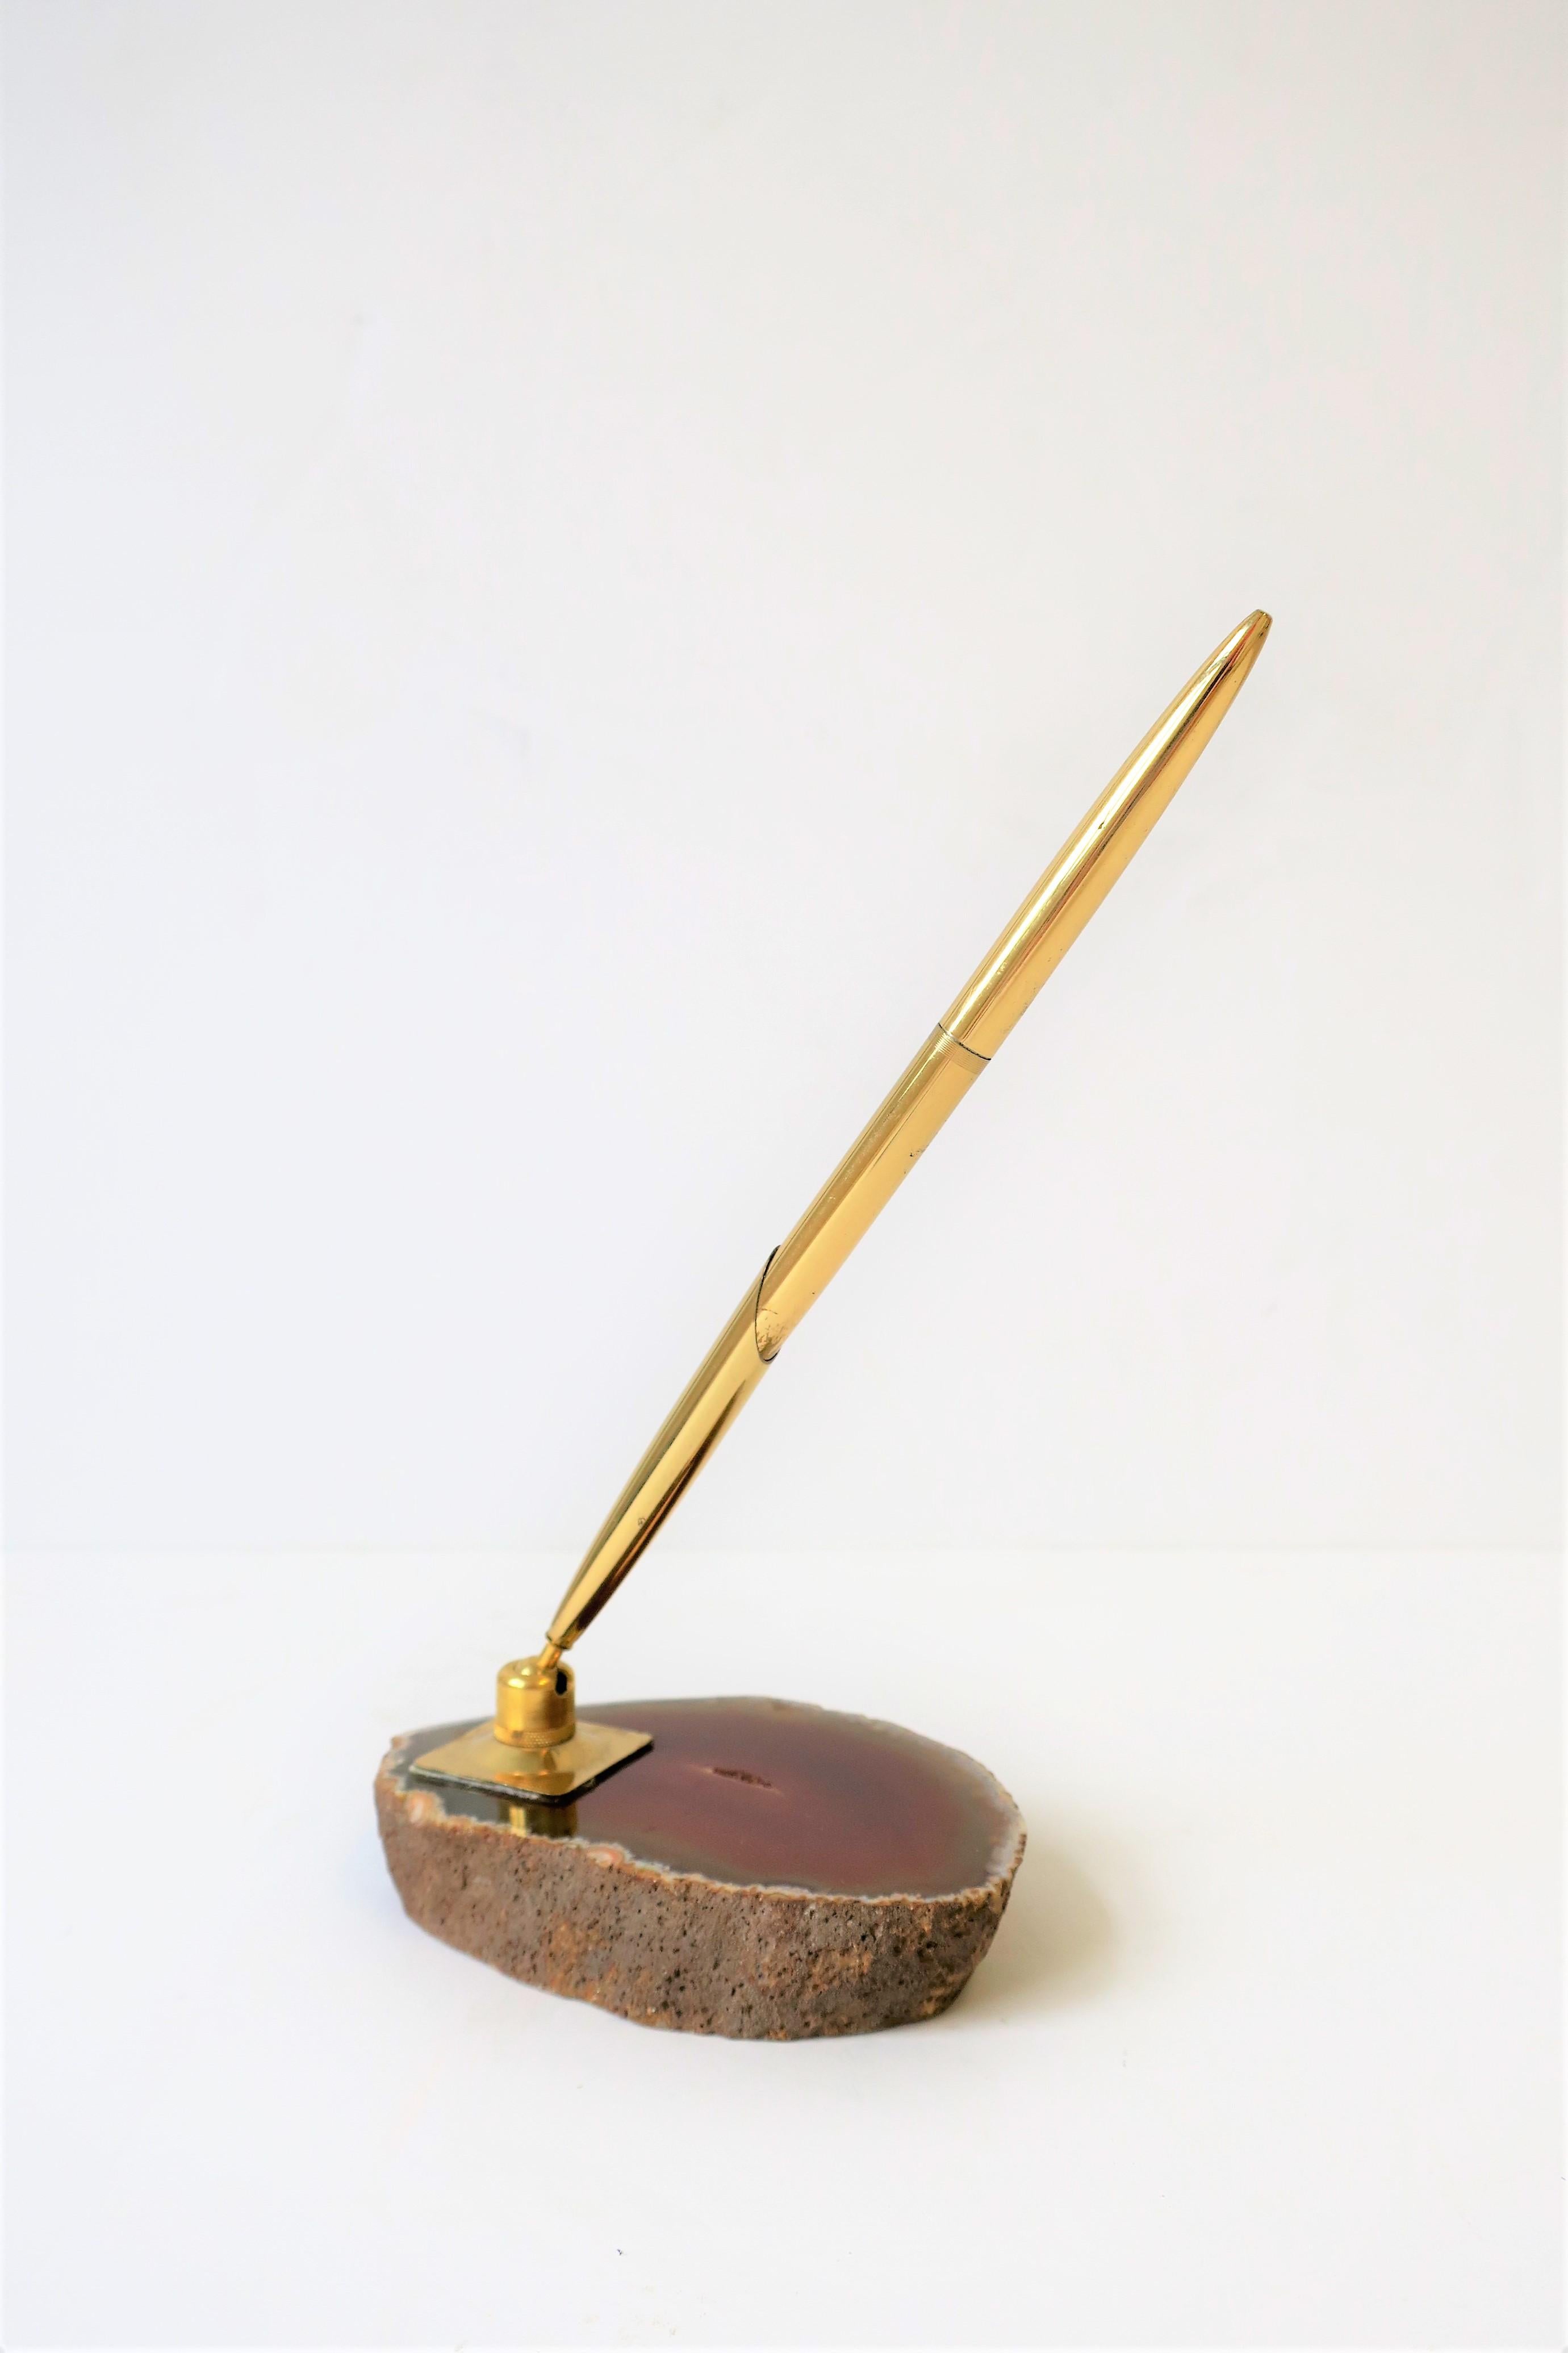 Agate Onyx and Brass Desk Pen Holder, circa 1970s For Sale 5